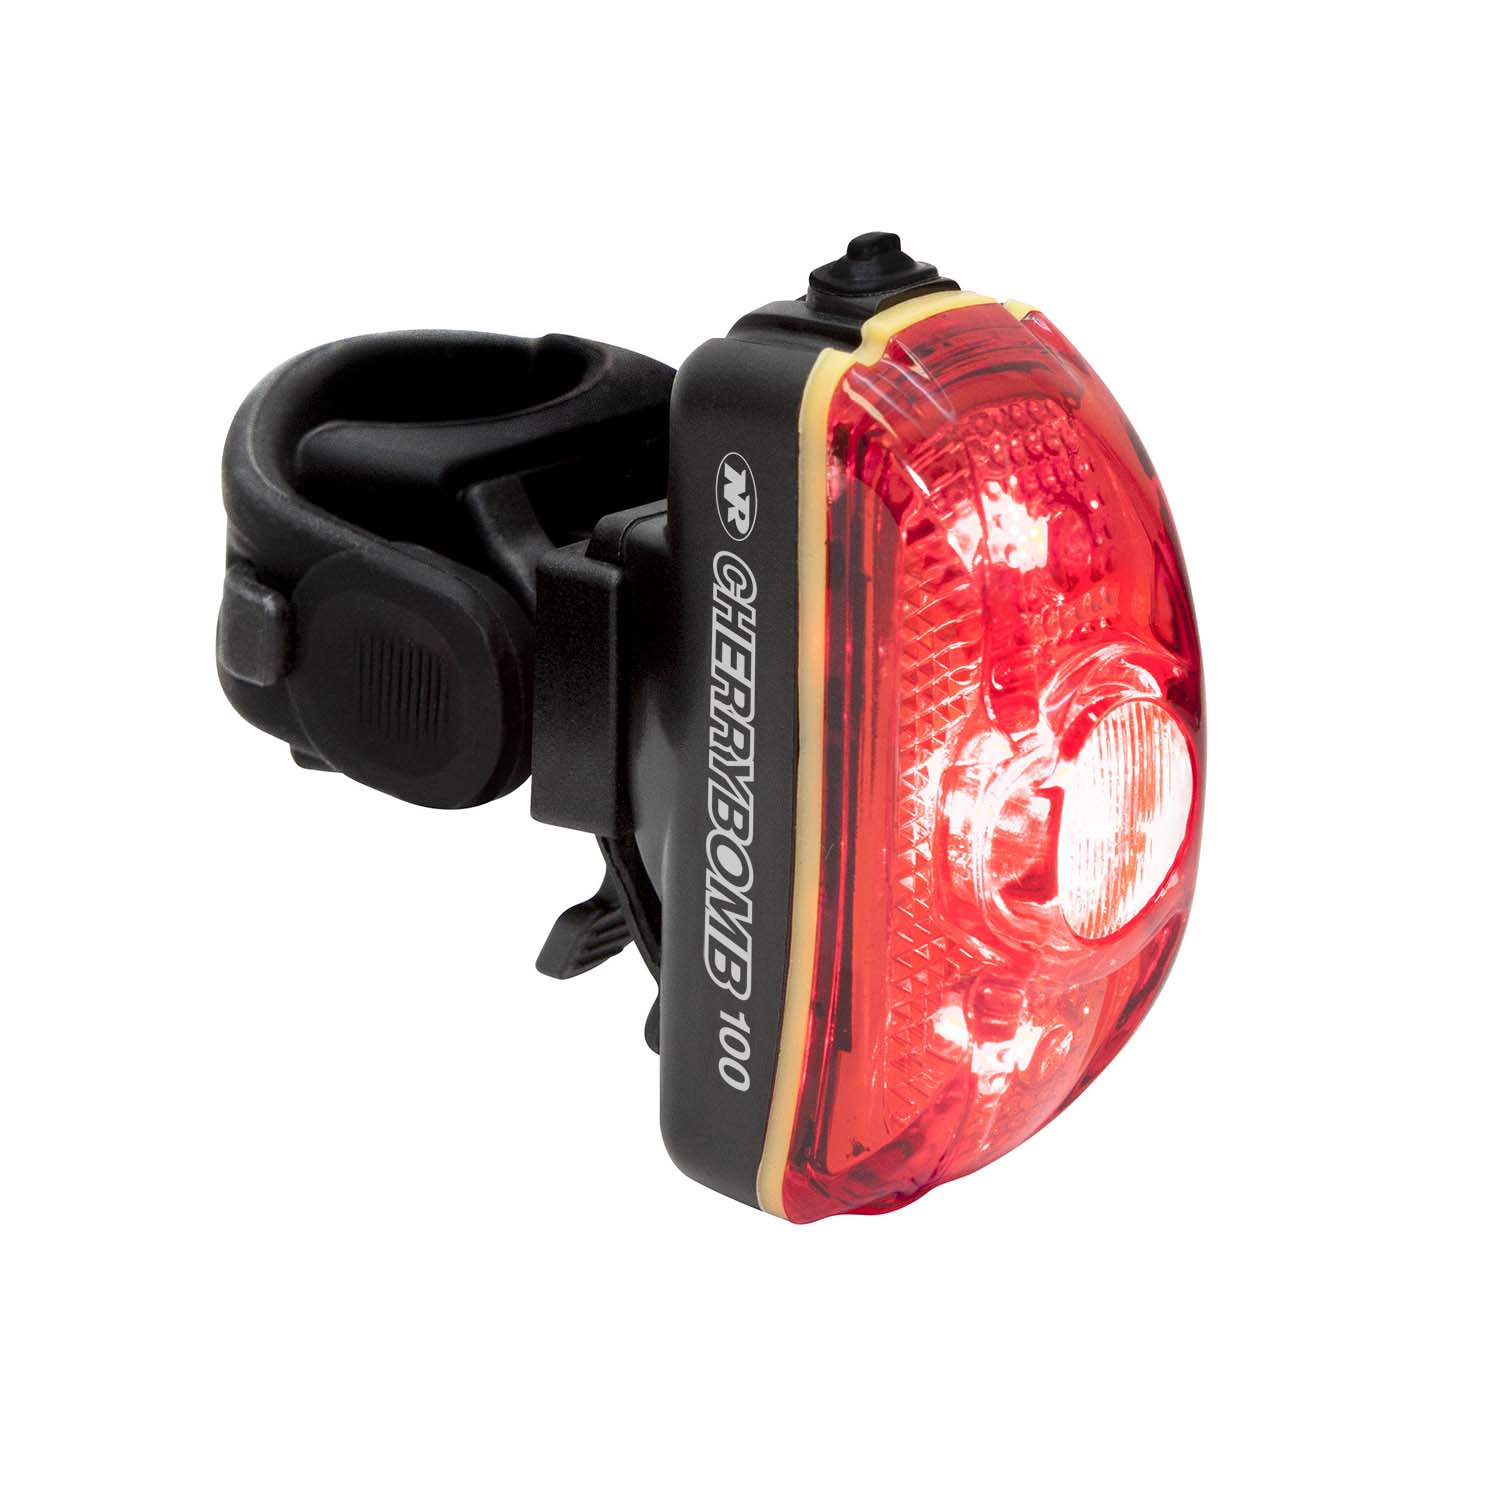 Niterider Cherrybomb 100 Taillight - Ascent Cycles